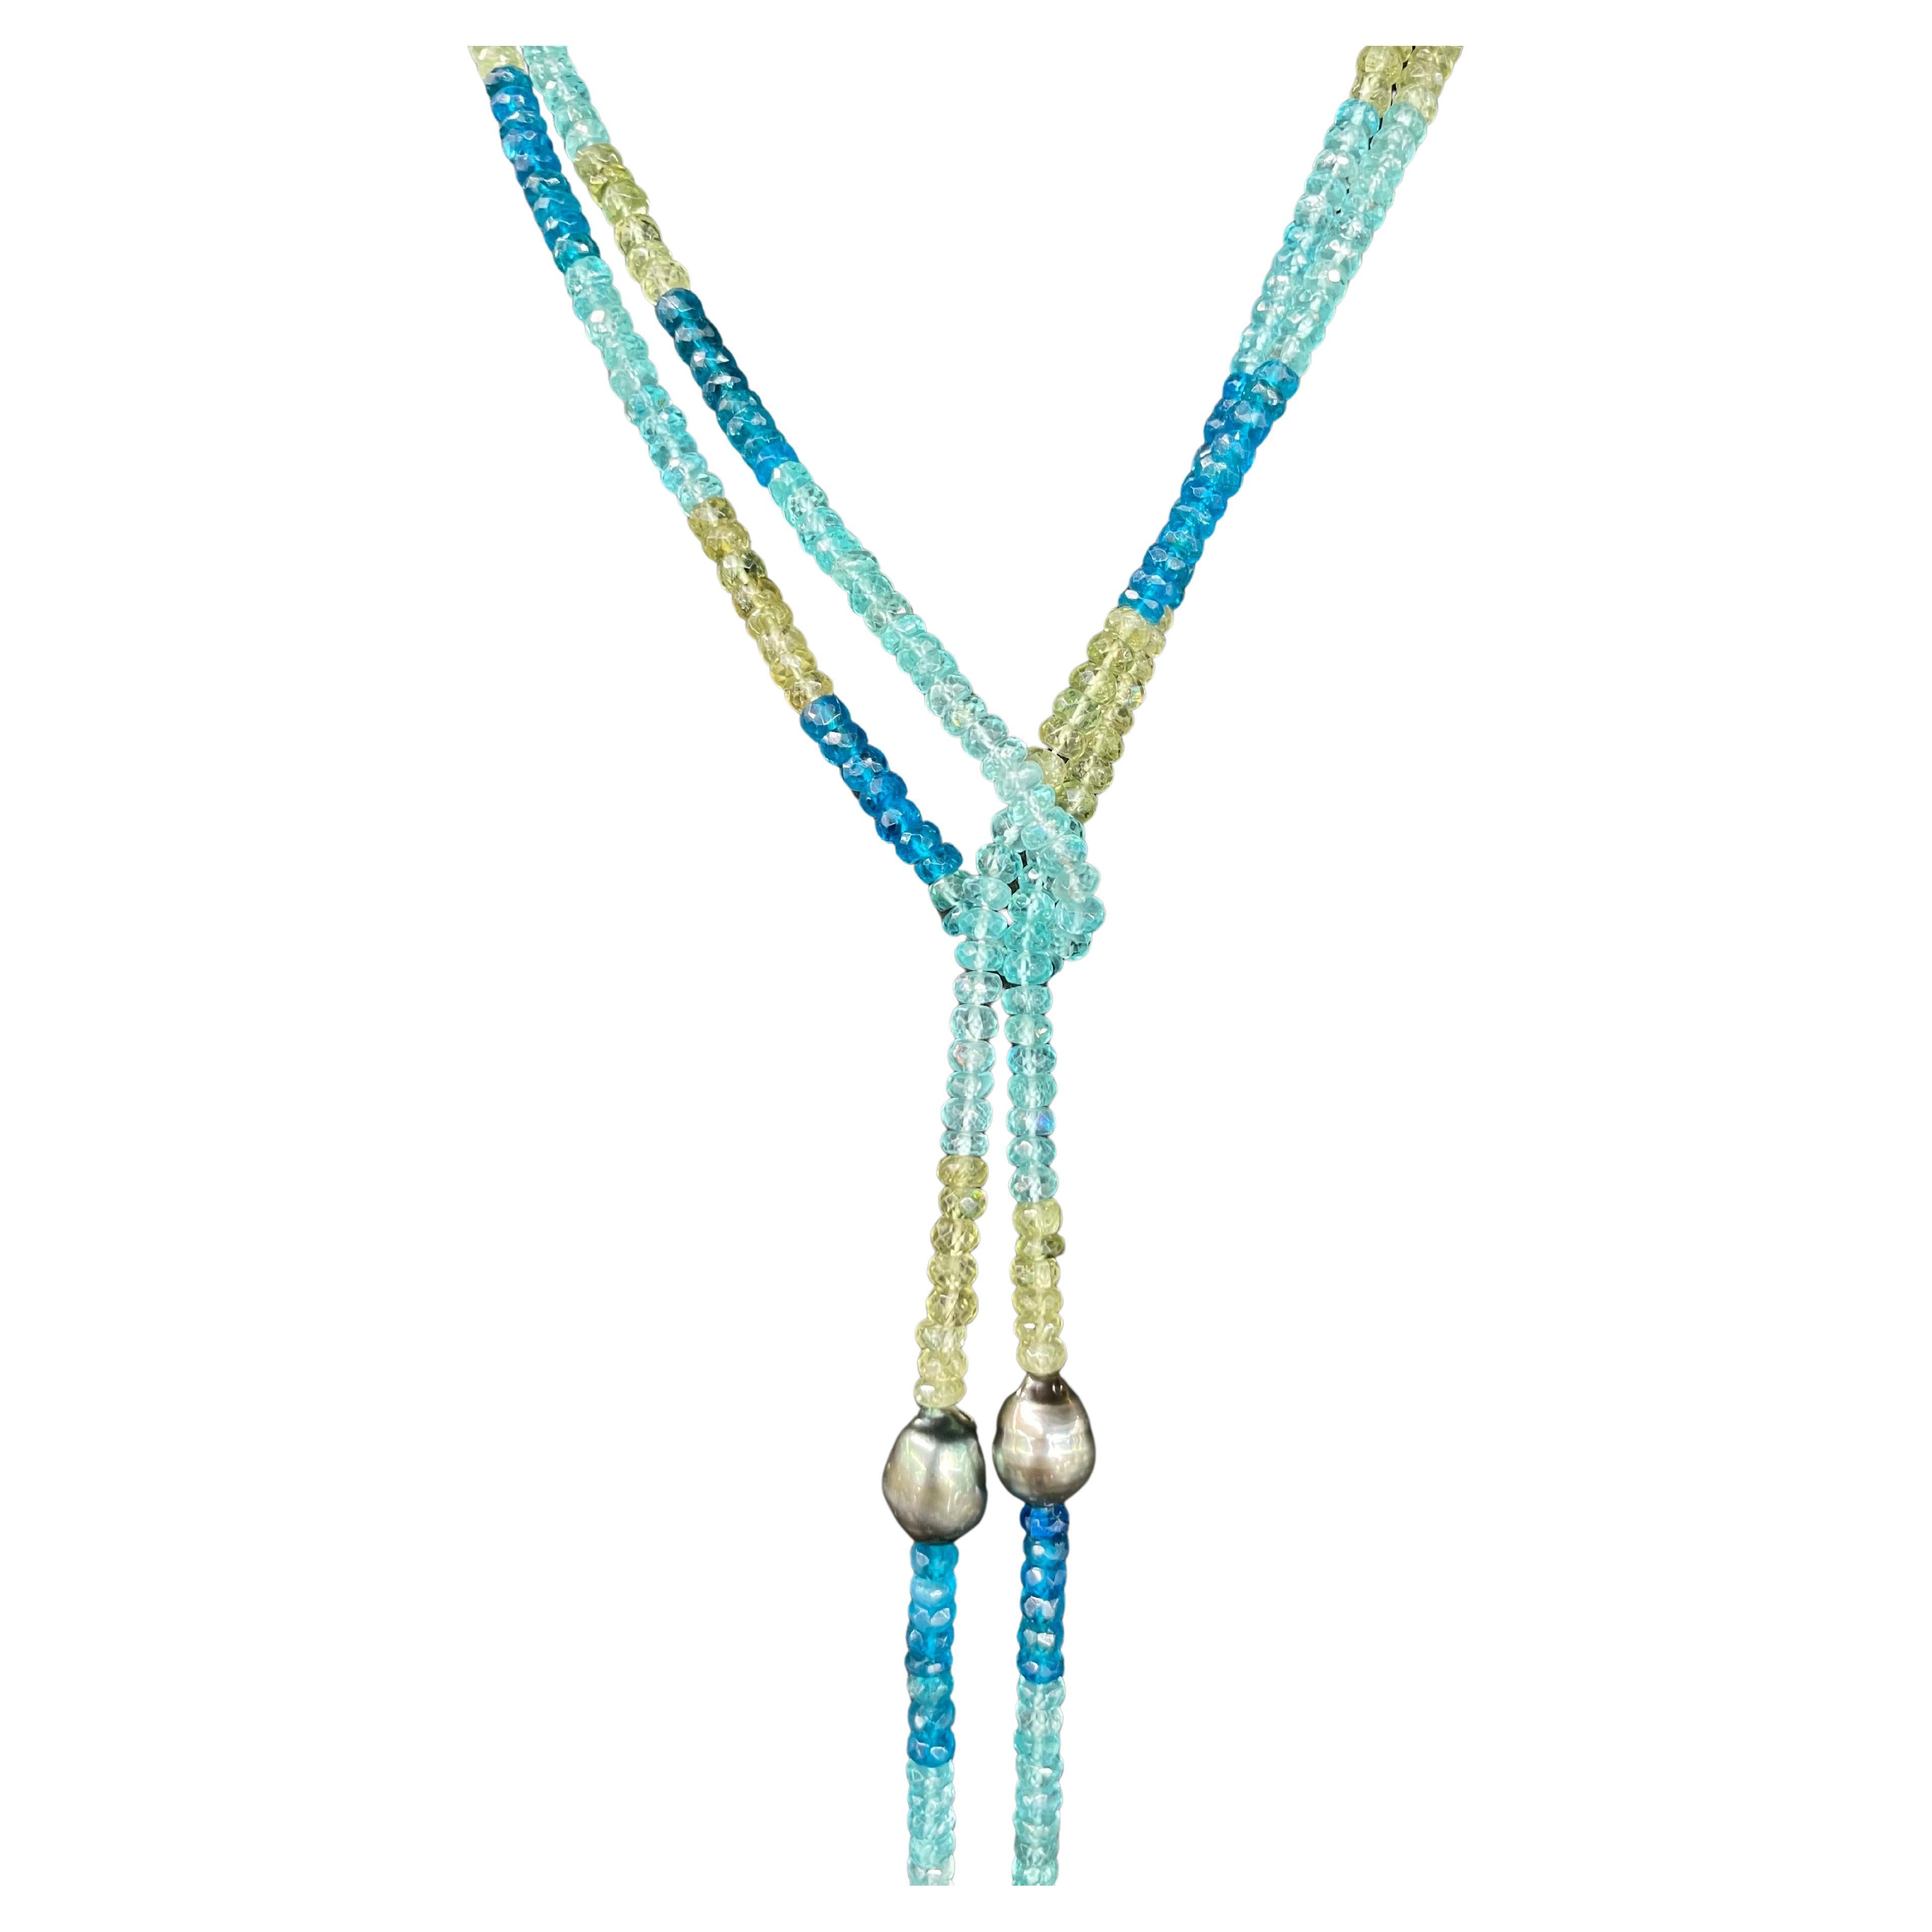 One strand of Apatite beads ranging from blue, teal and greenish yellow with 10 Tahitian Pearls measuring 12-15 MM, 50 Inches long.
